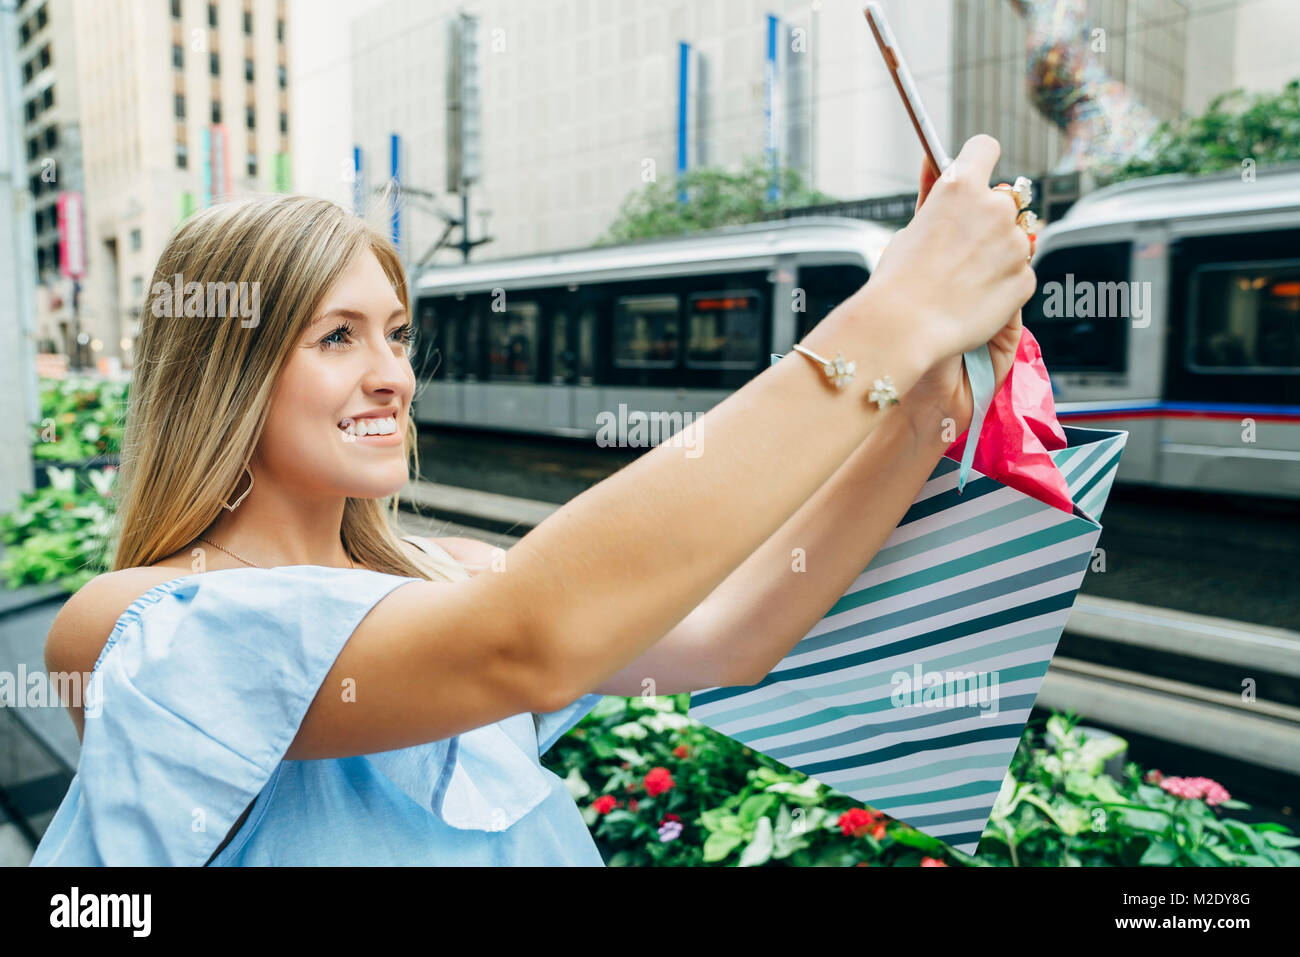 Caucasian woman with shopping bag posing for cell phone selfie Stock Photo